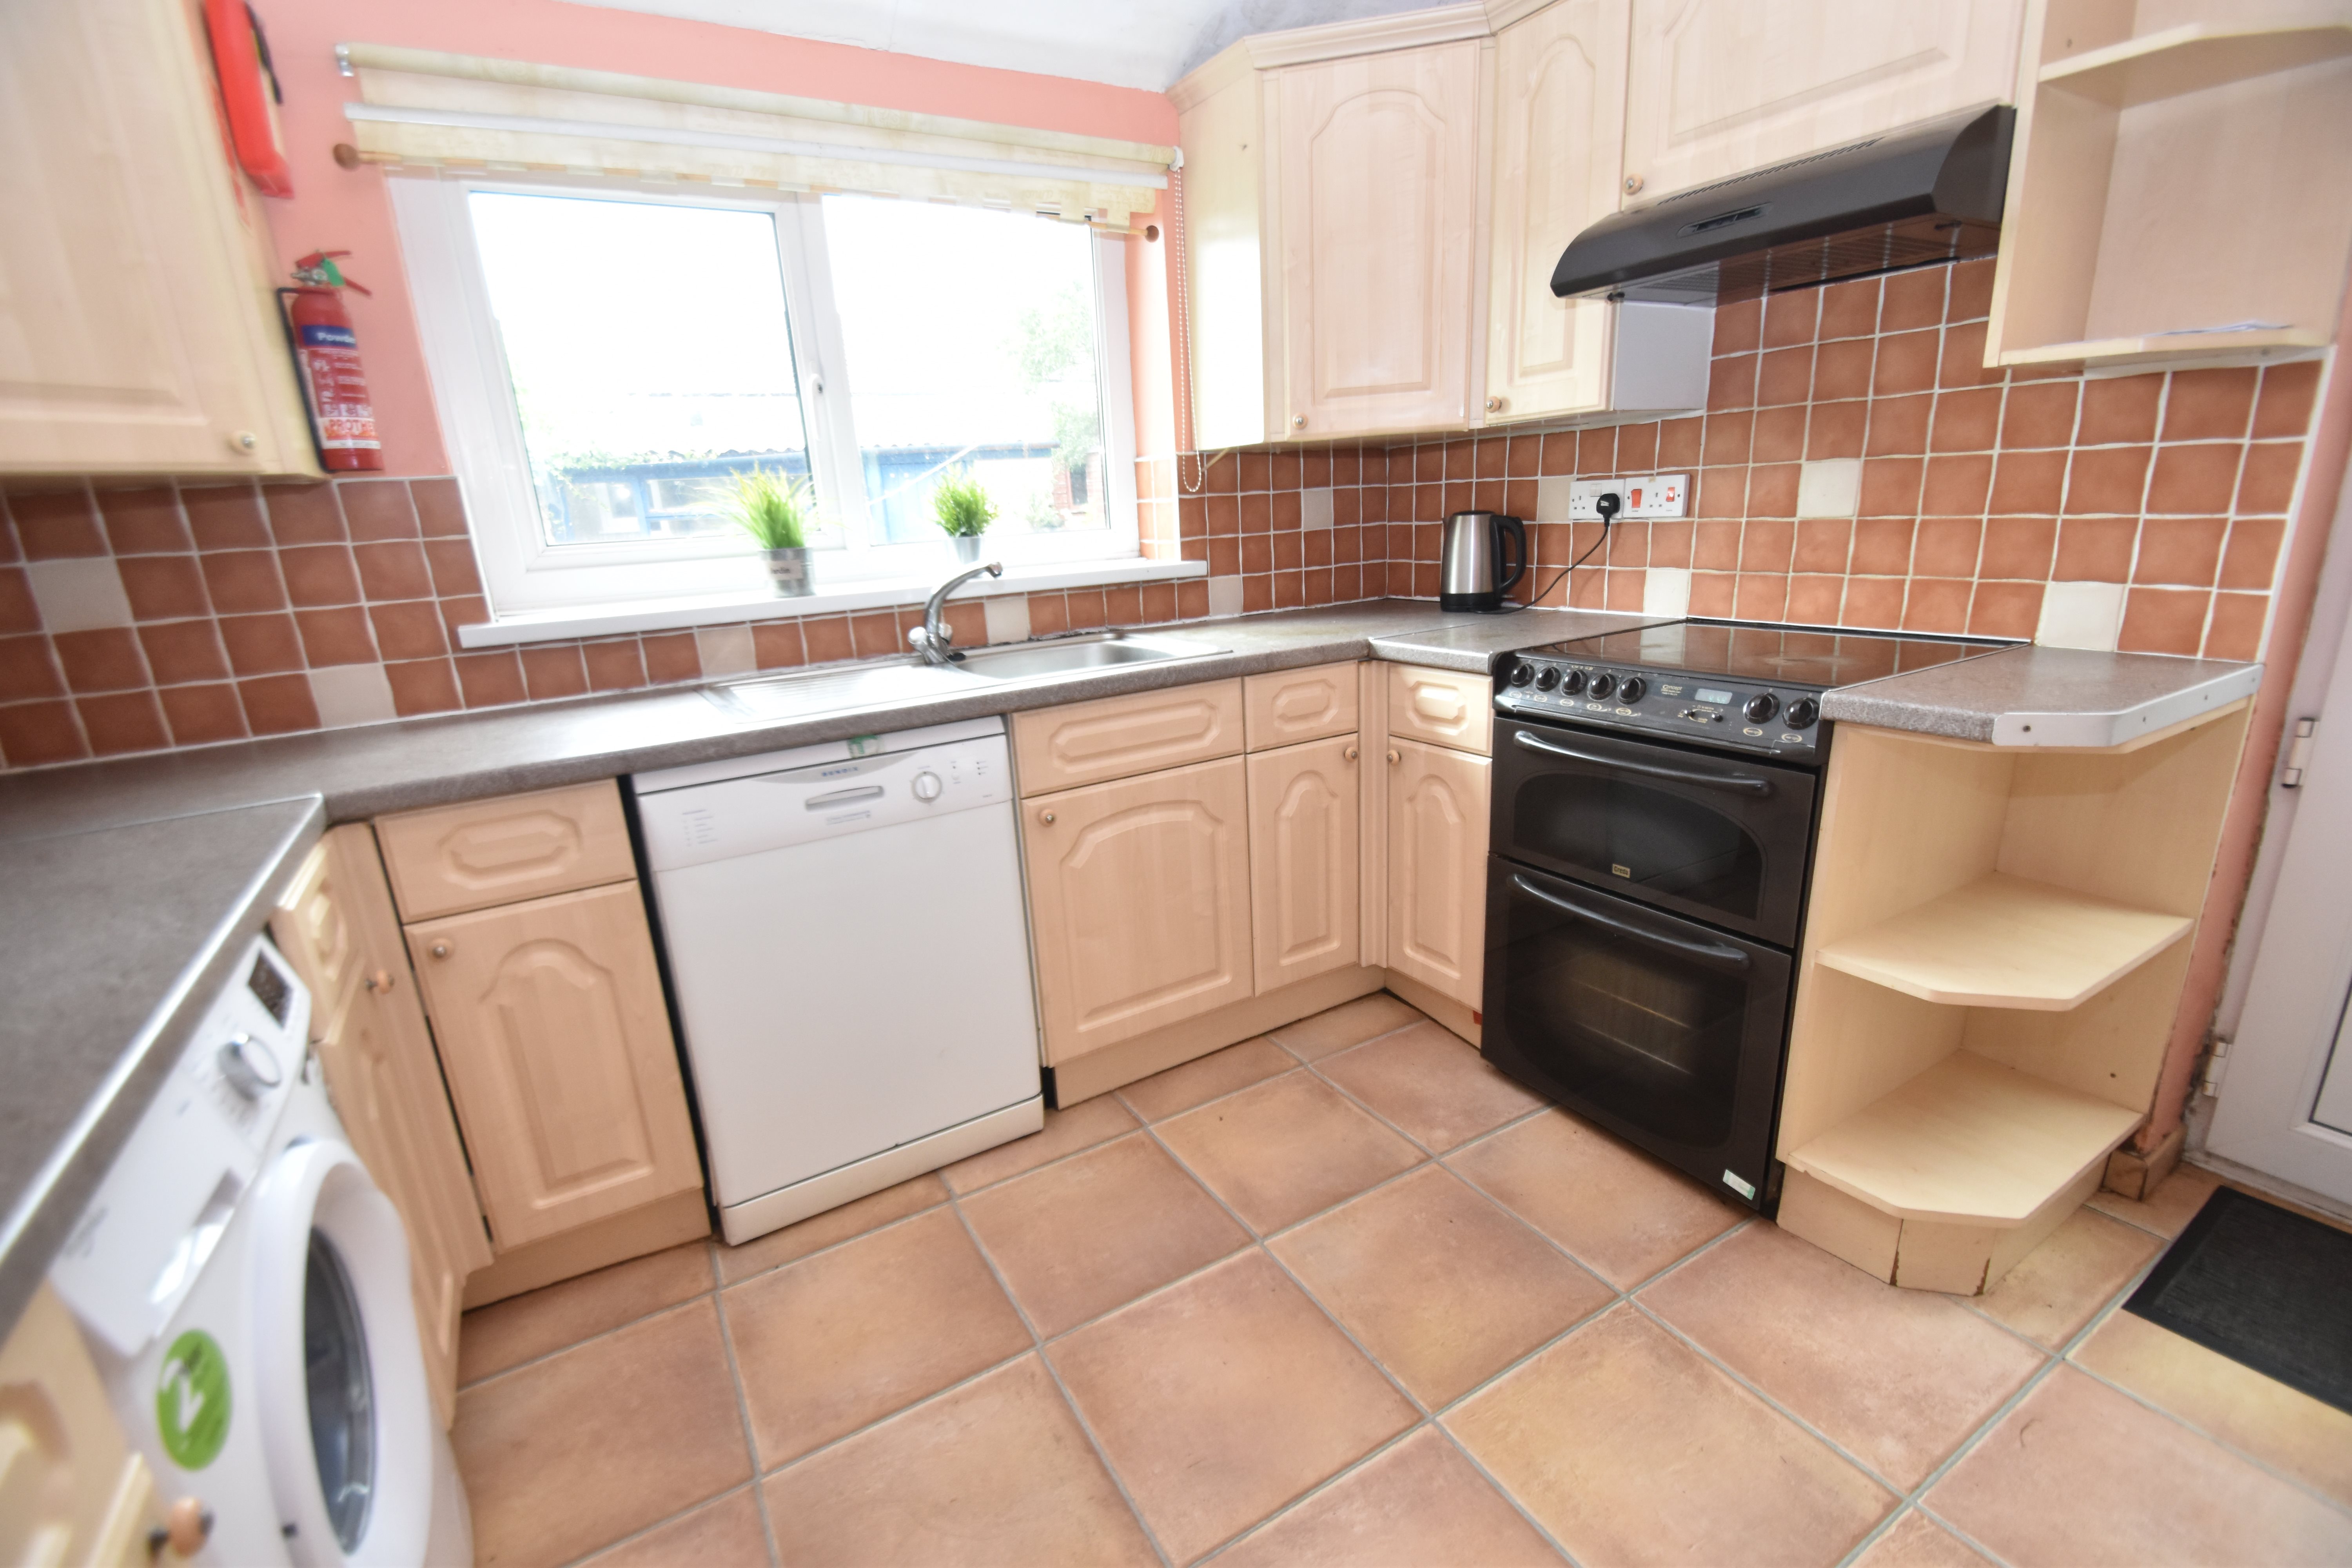 4 bed house to rent in Lisvane Street, Cathays  - Property Image 8